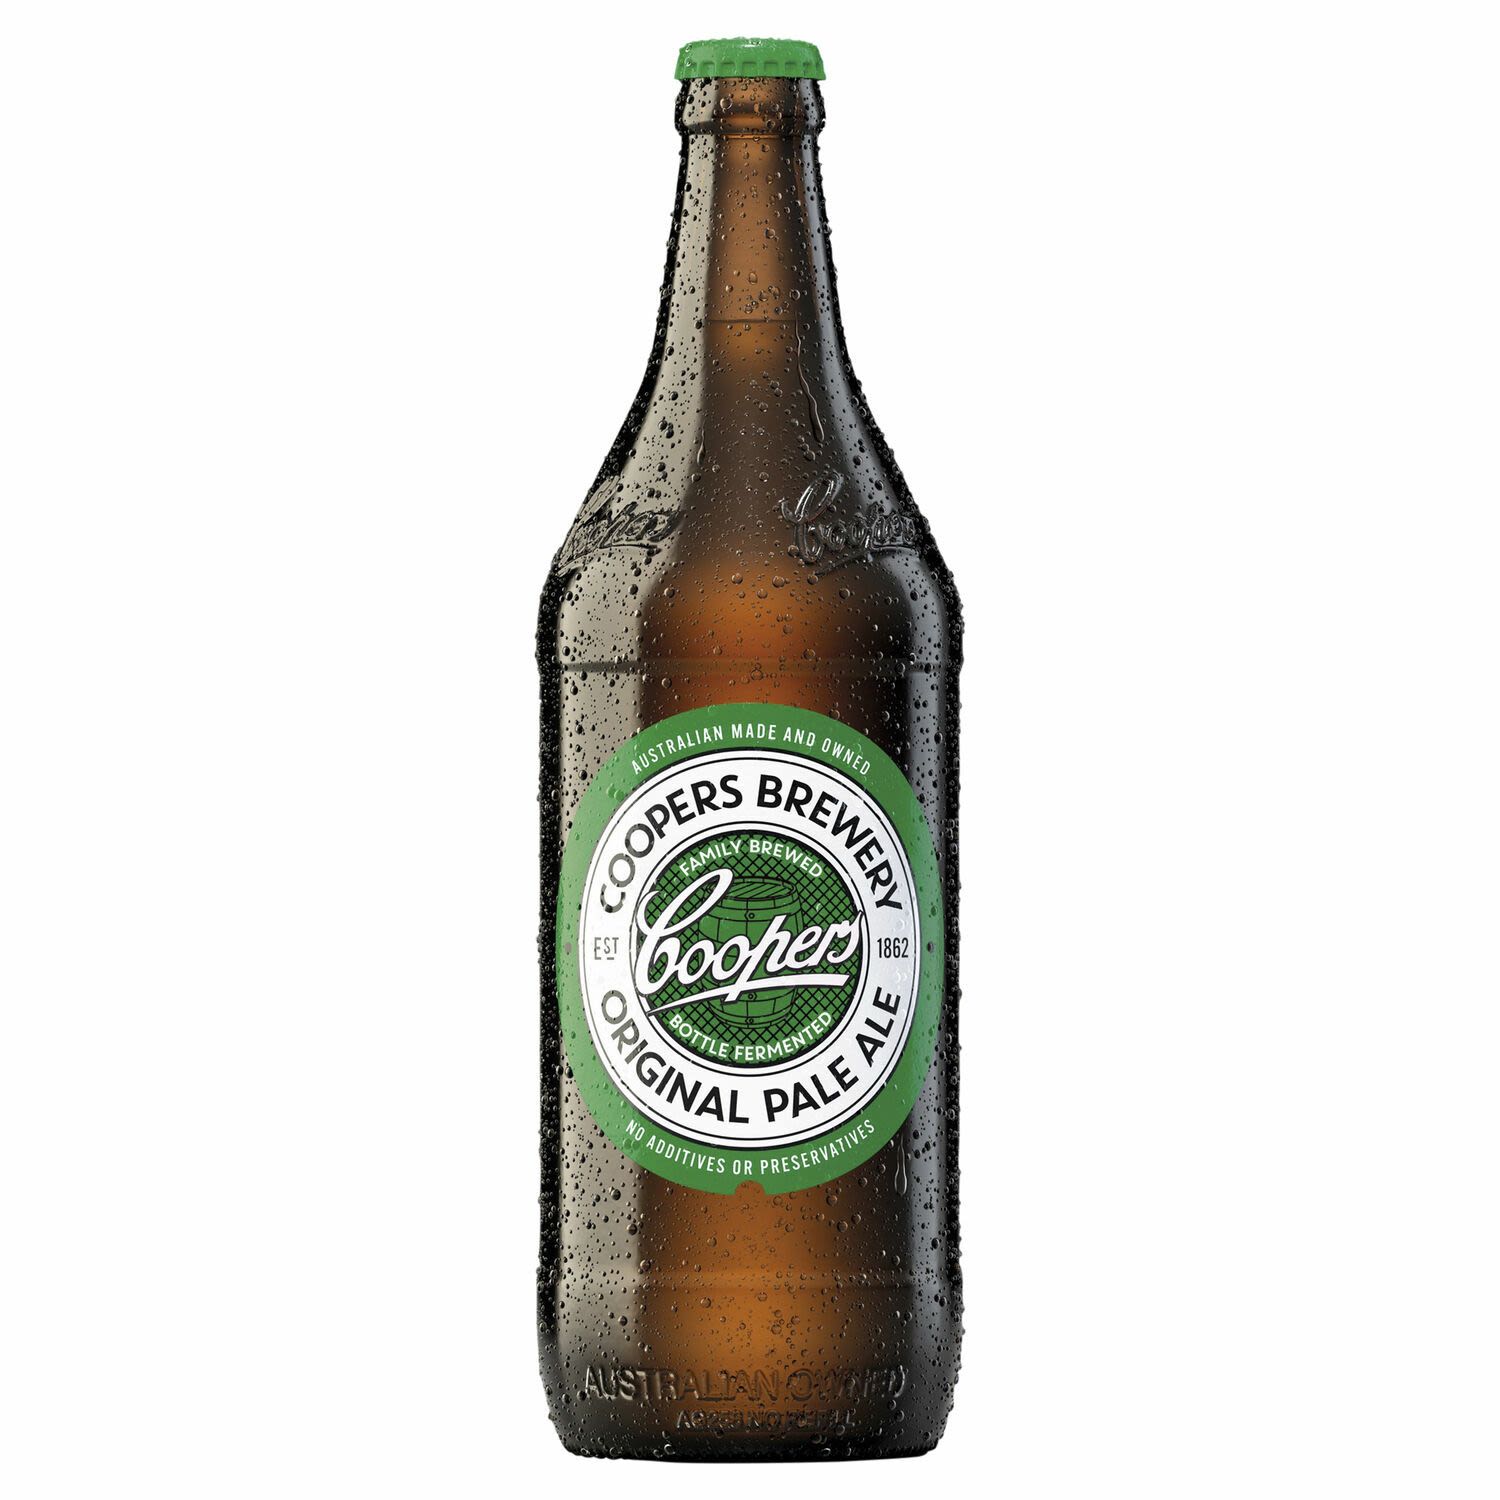 Coopers Pale Ale Bottle 750mL